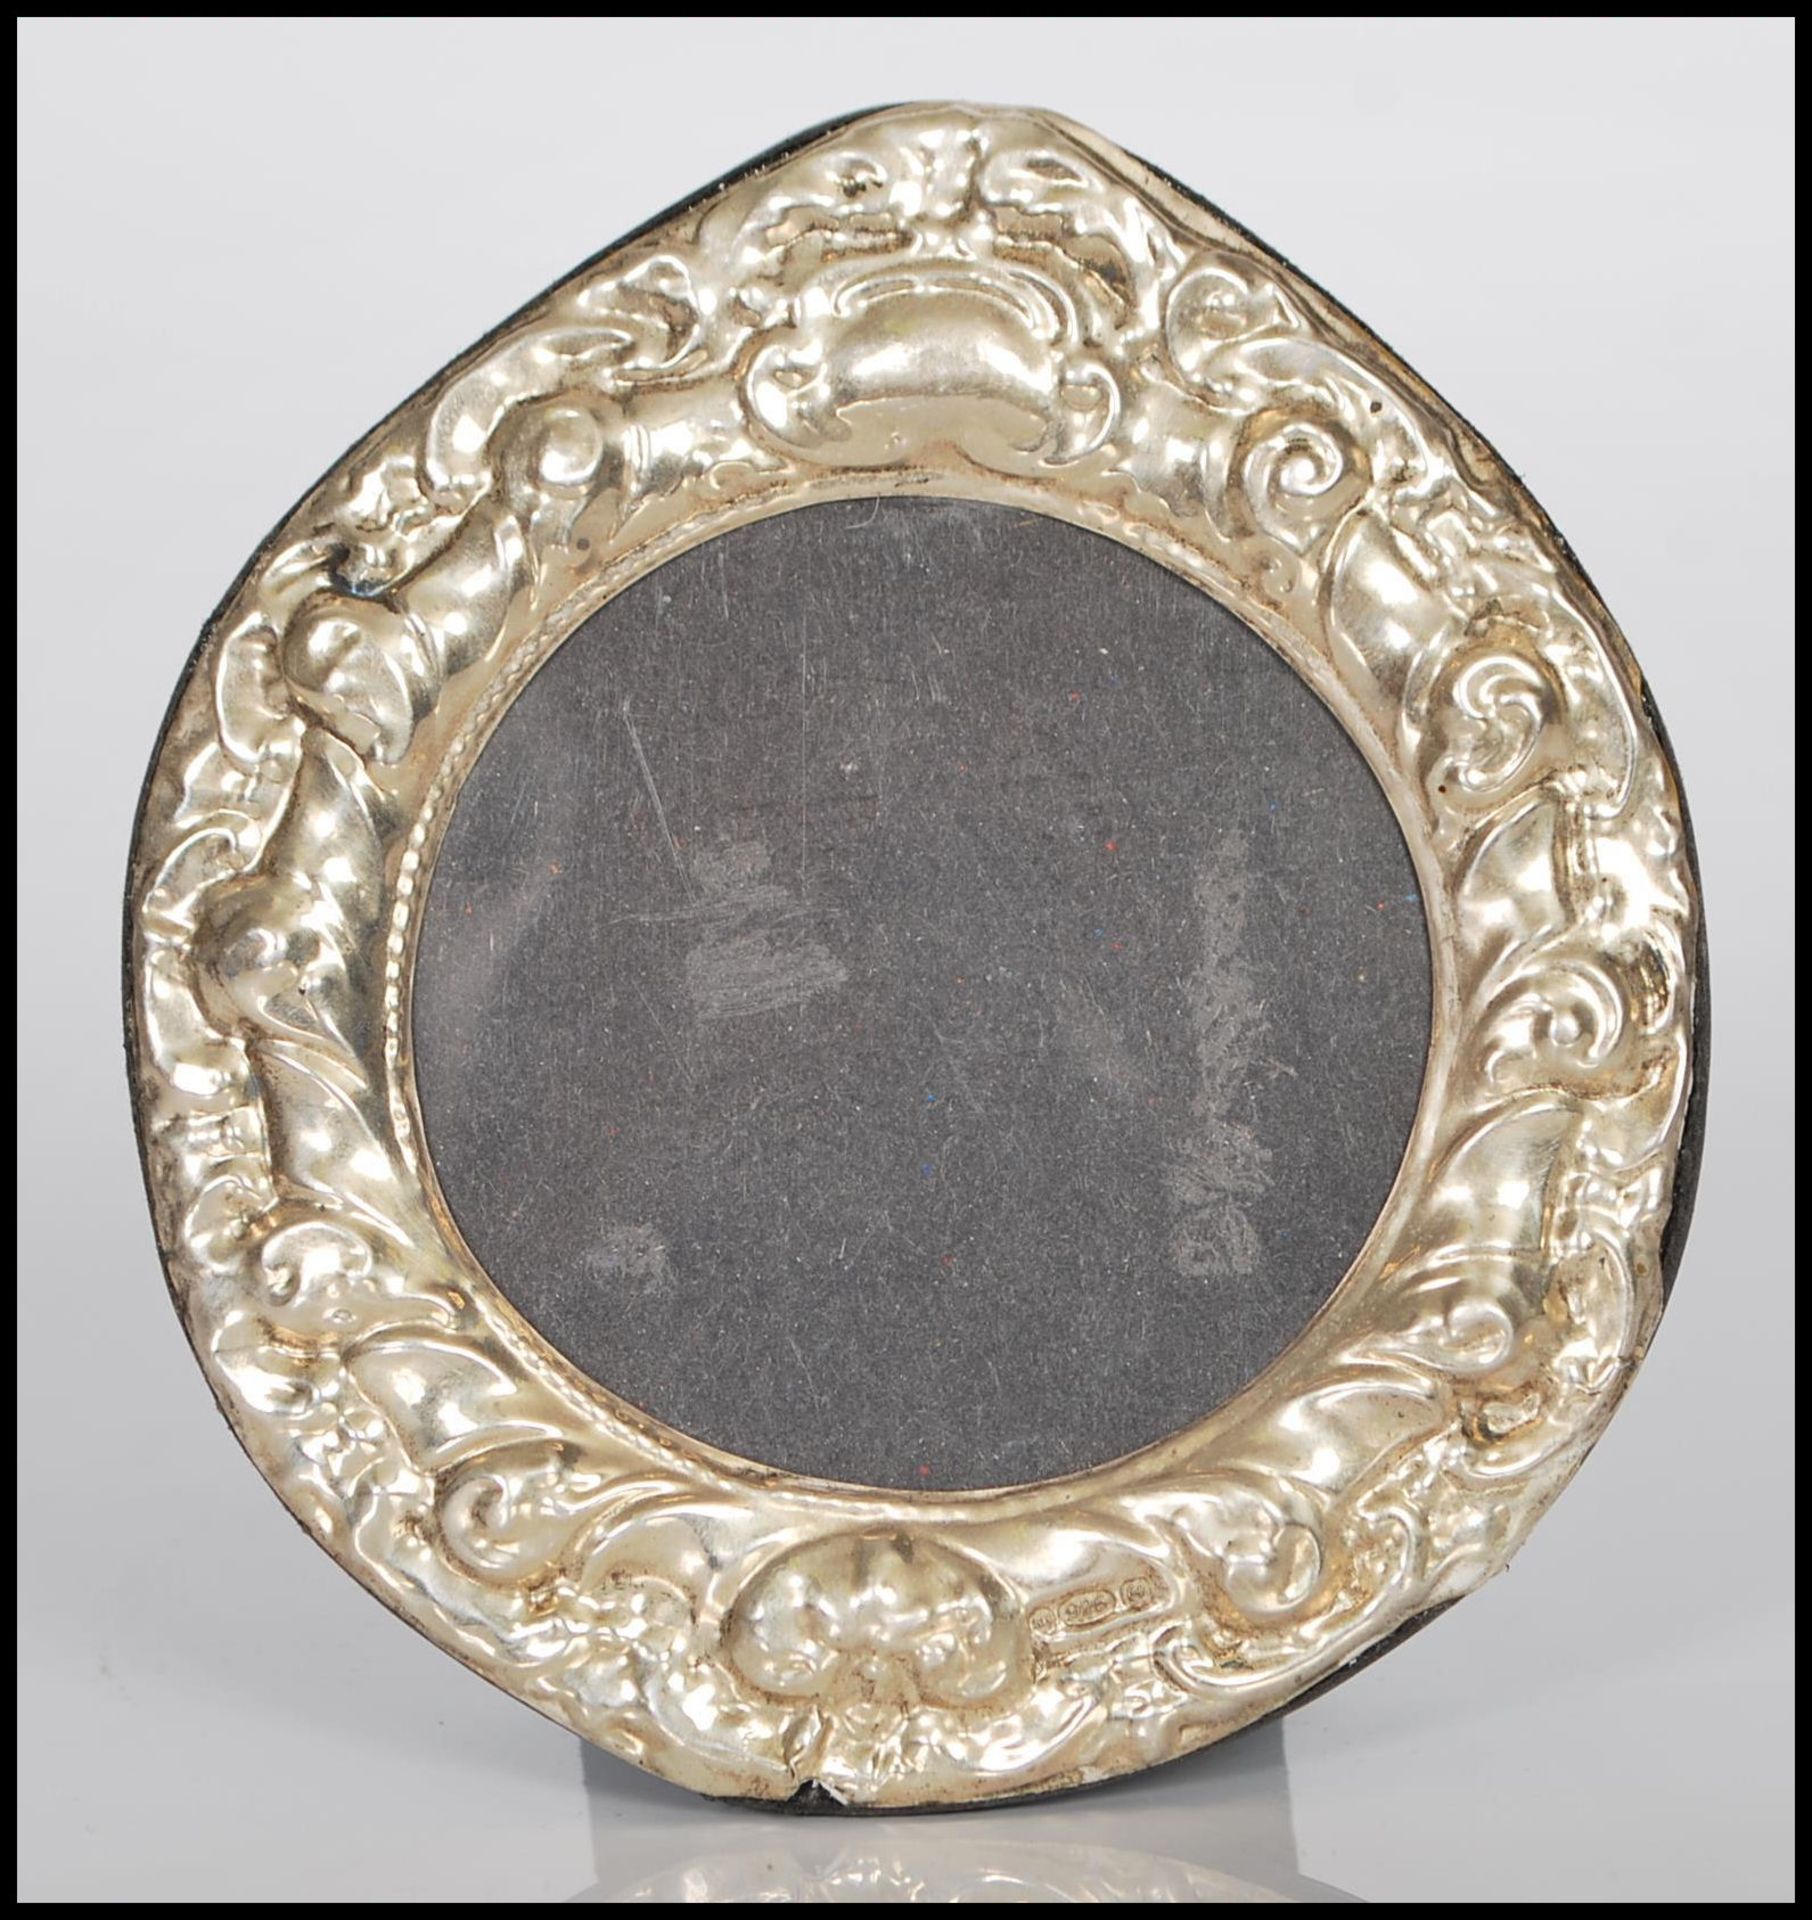 A sterling silver easel back photograph picture frame of circular form having rococo style relief